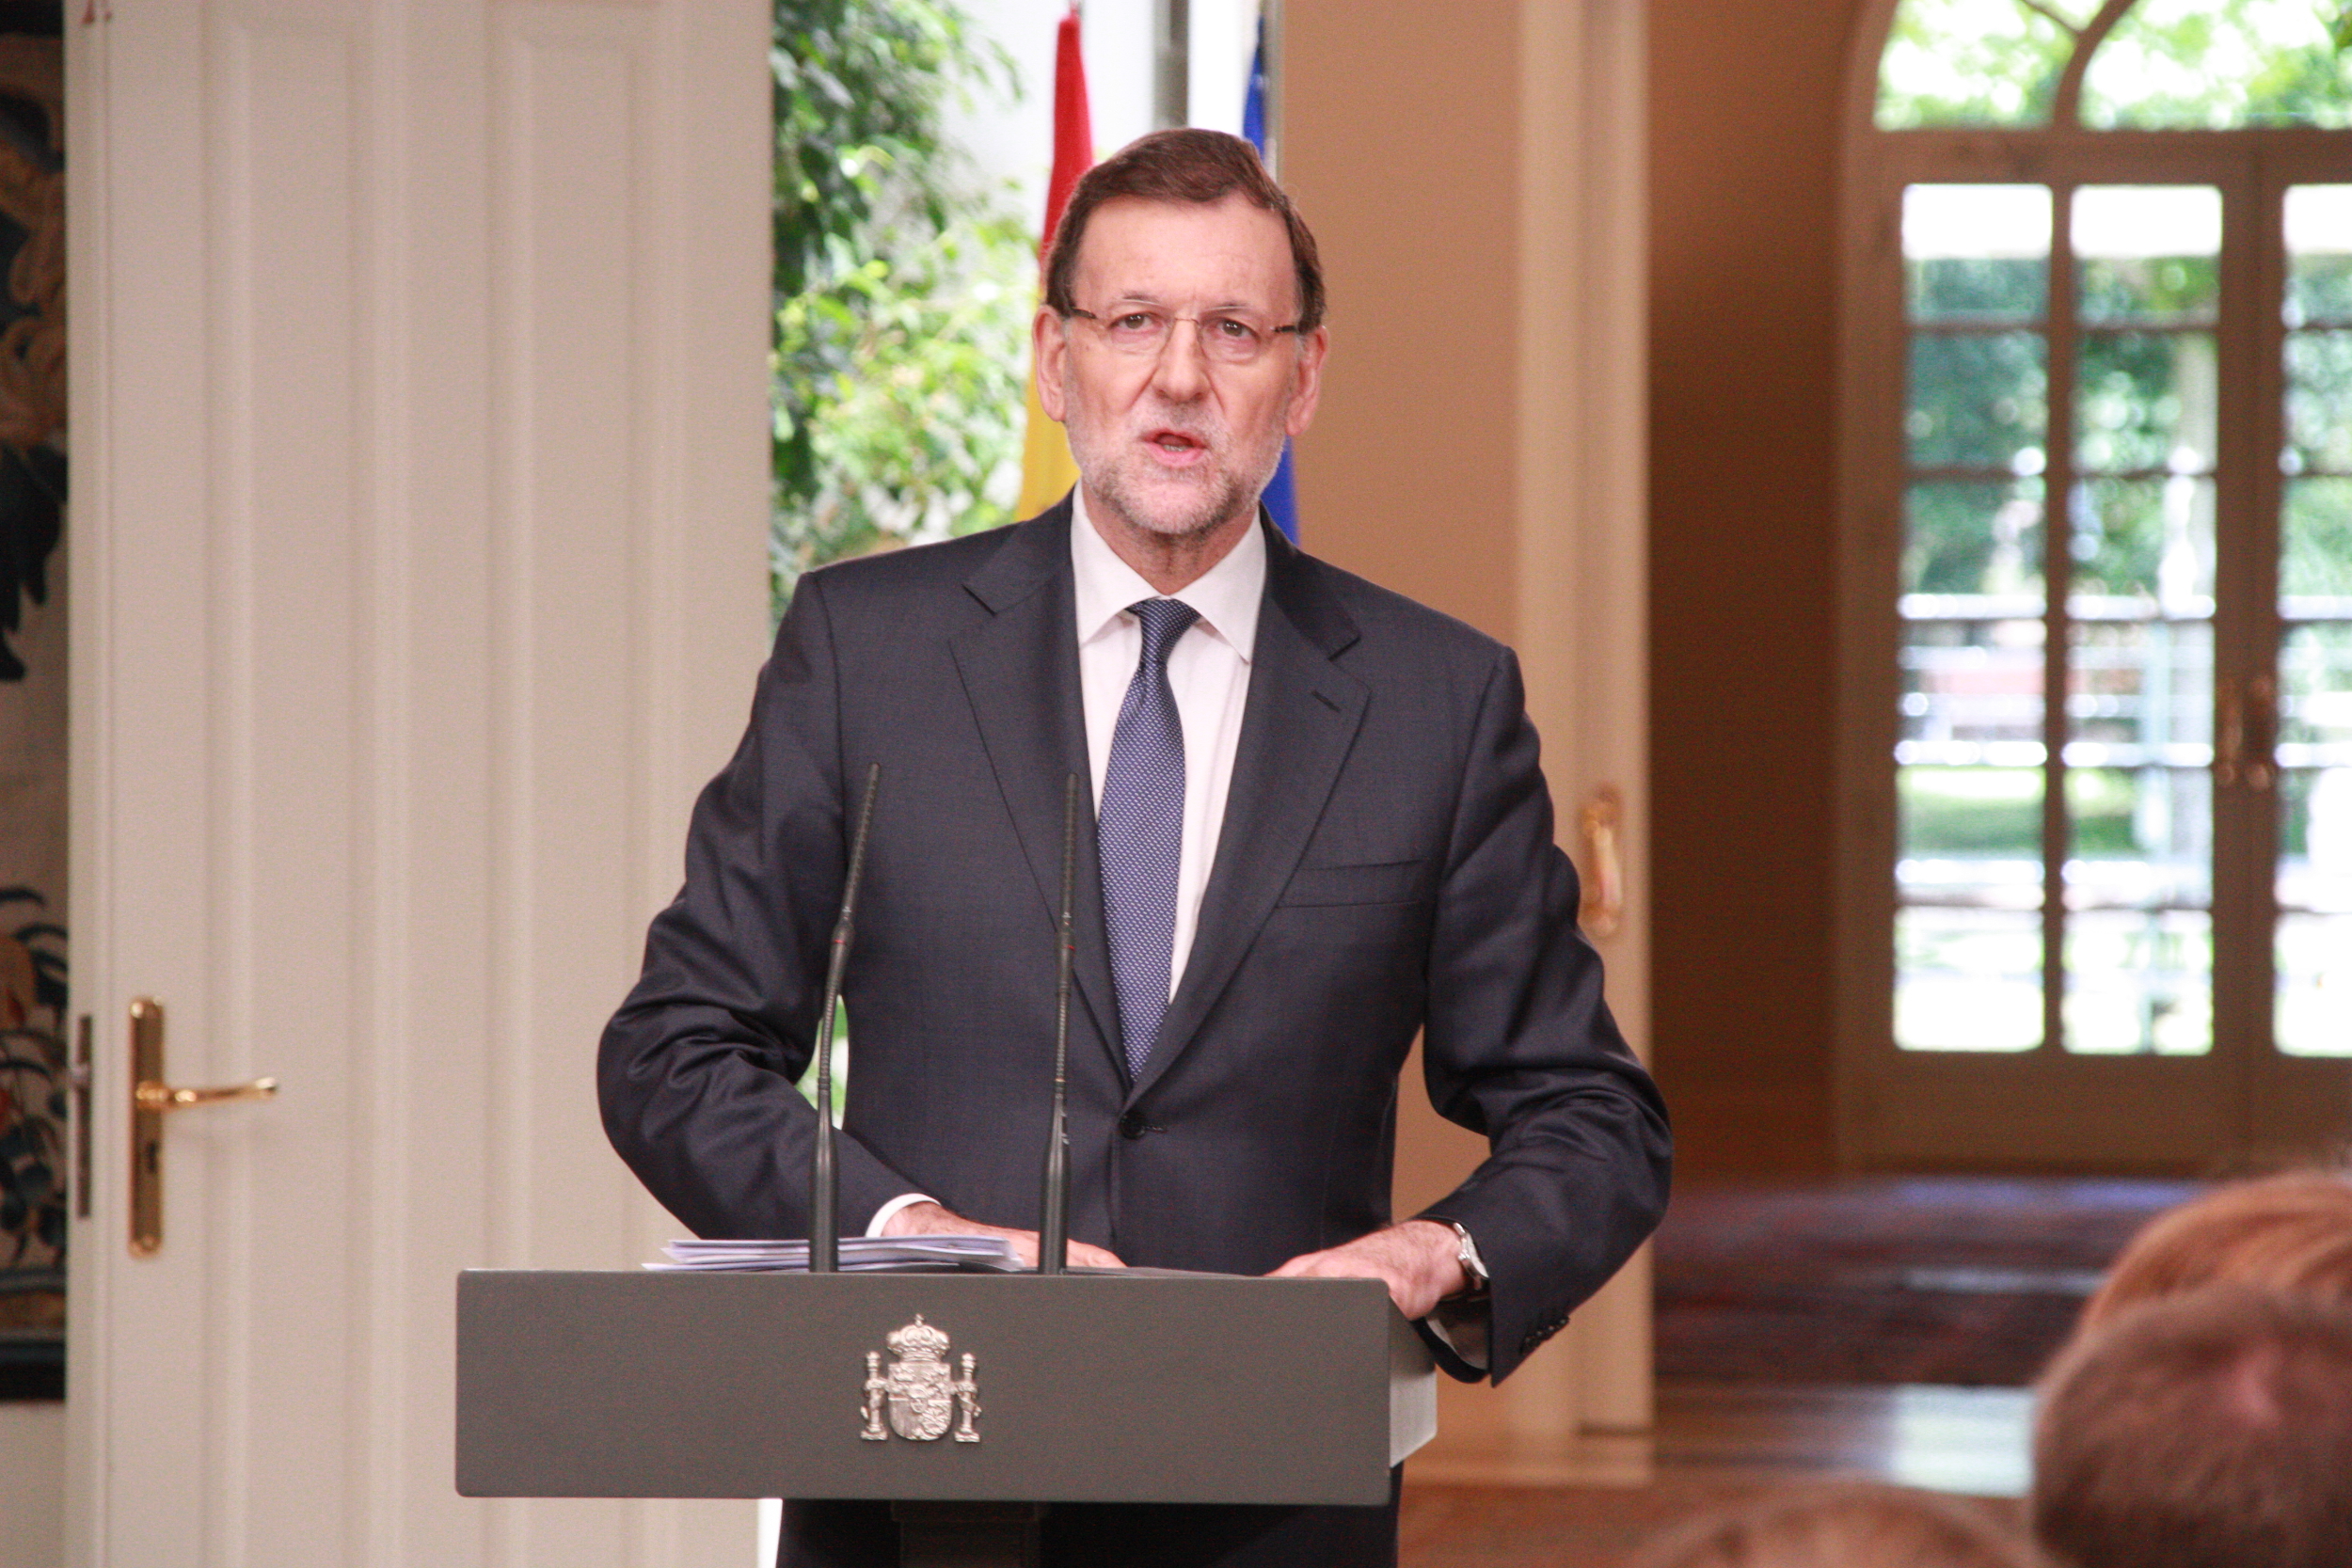 Spanish Prime Minister, Mariano Rajoy, says Spanish Elections will be held "most probably" on the 20th December